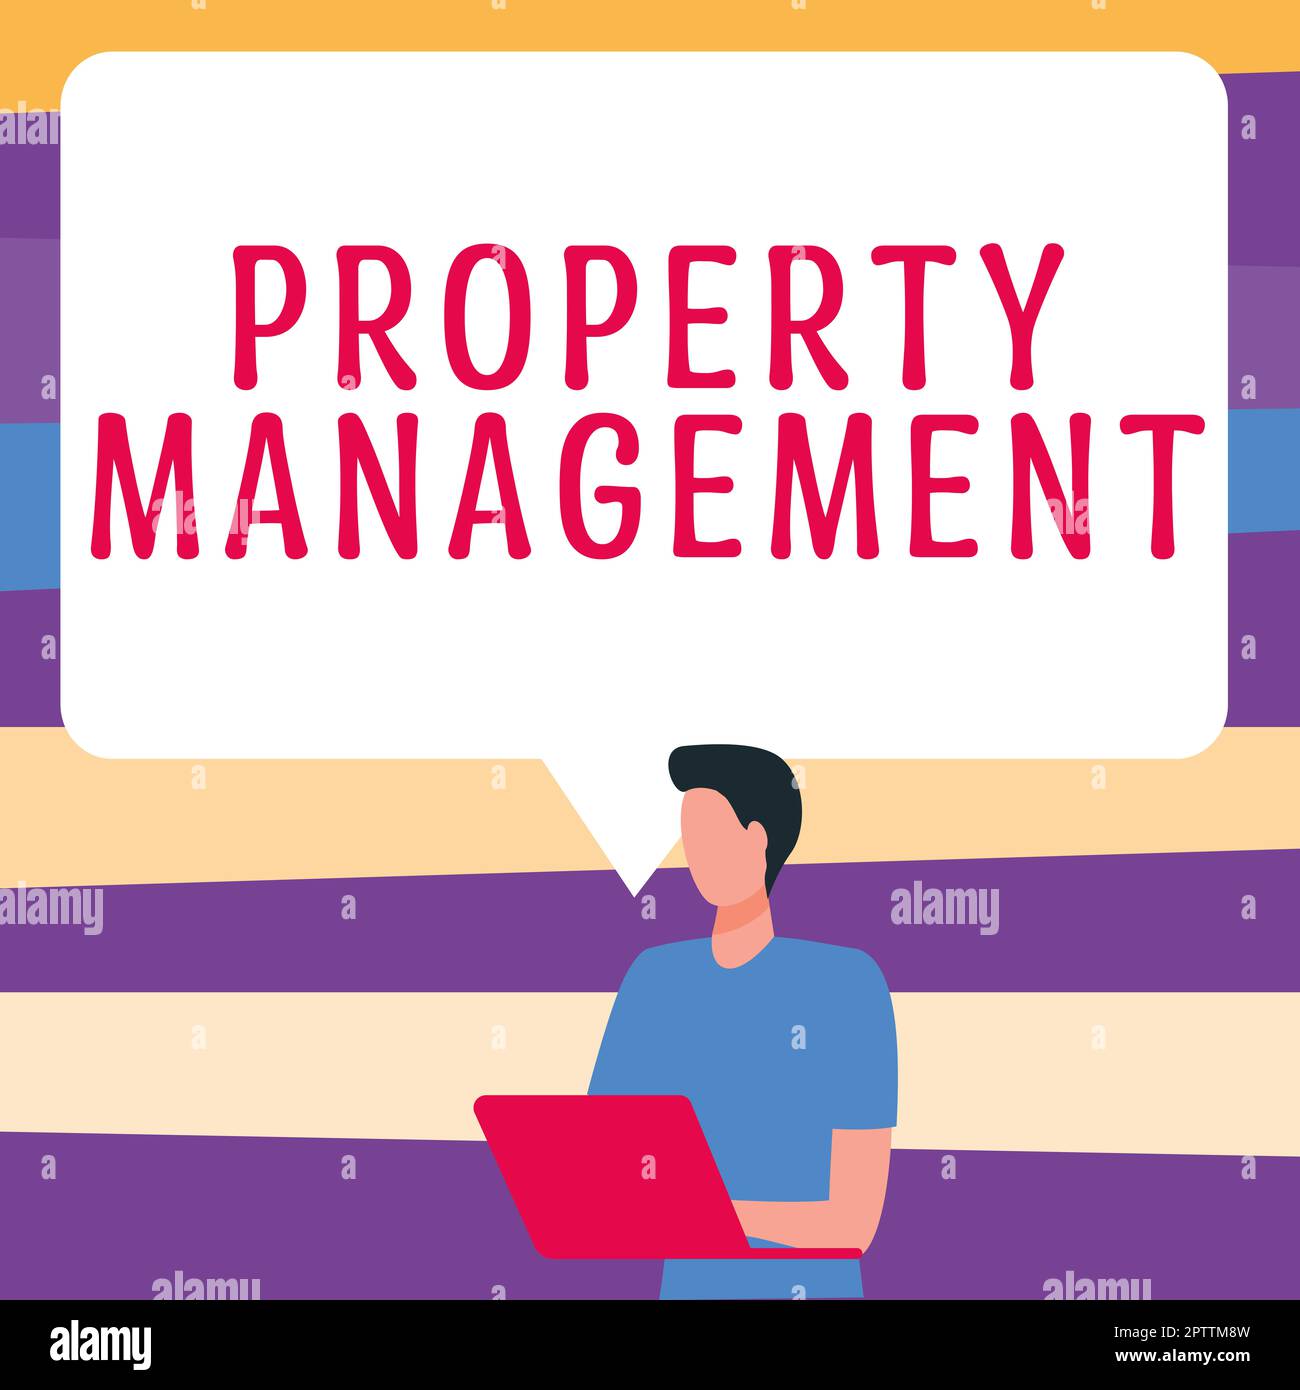 Text caption presenting Property Management, Concept meaning Overseeing of Real Estate Preserved value of Facility Stock Photo